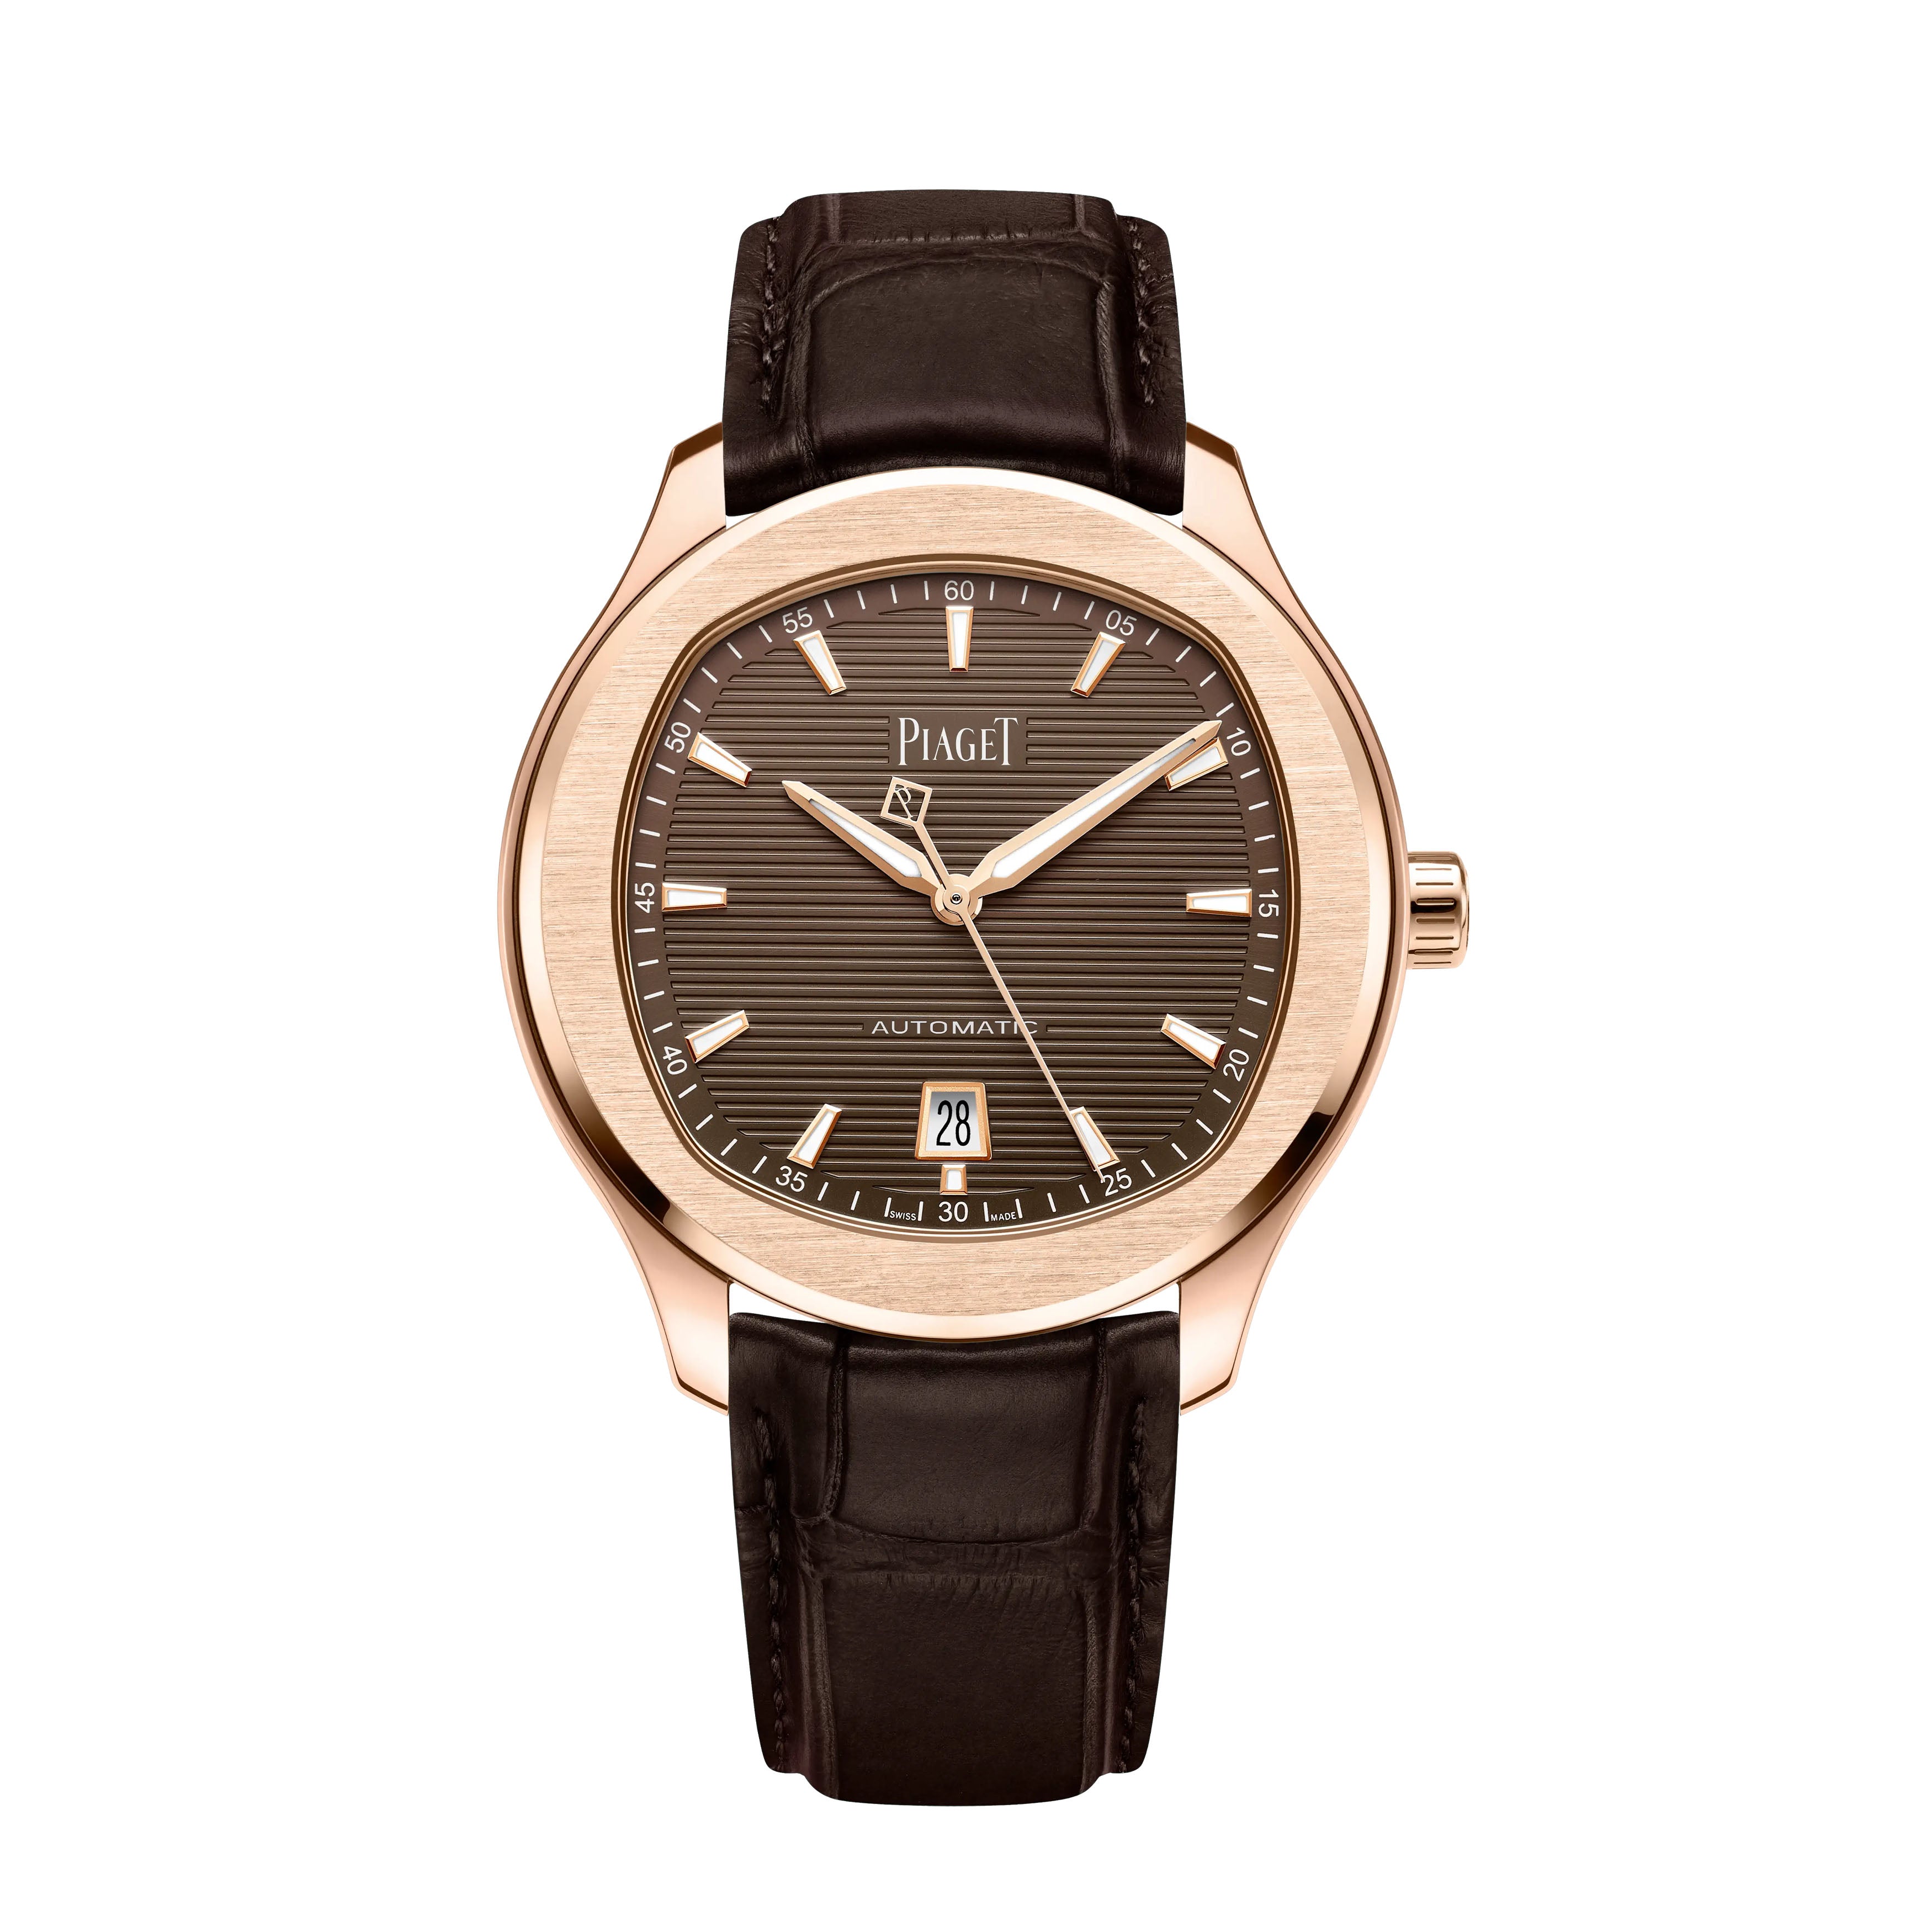 Piaget Polo Date Watch, 42mm Brown Dial, G0A48021